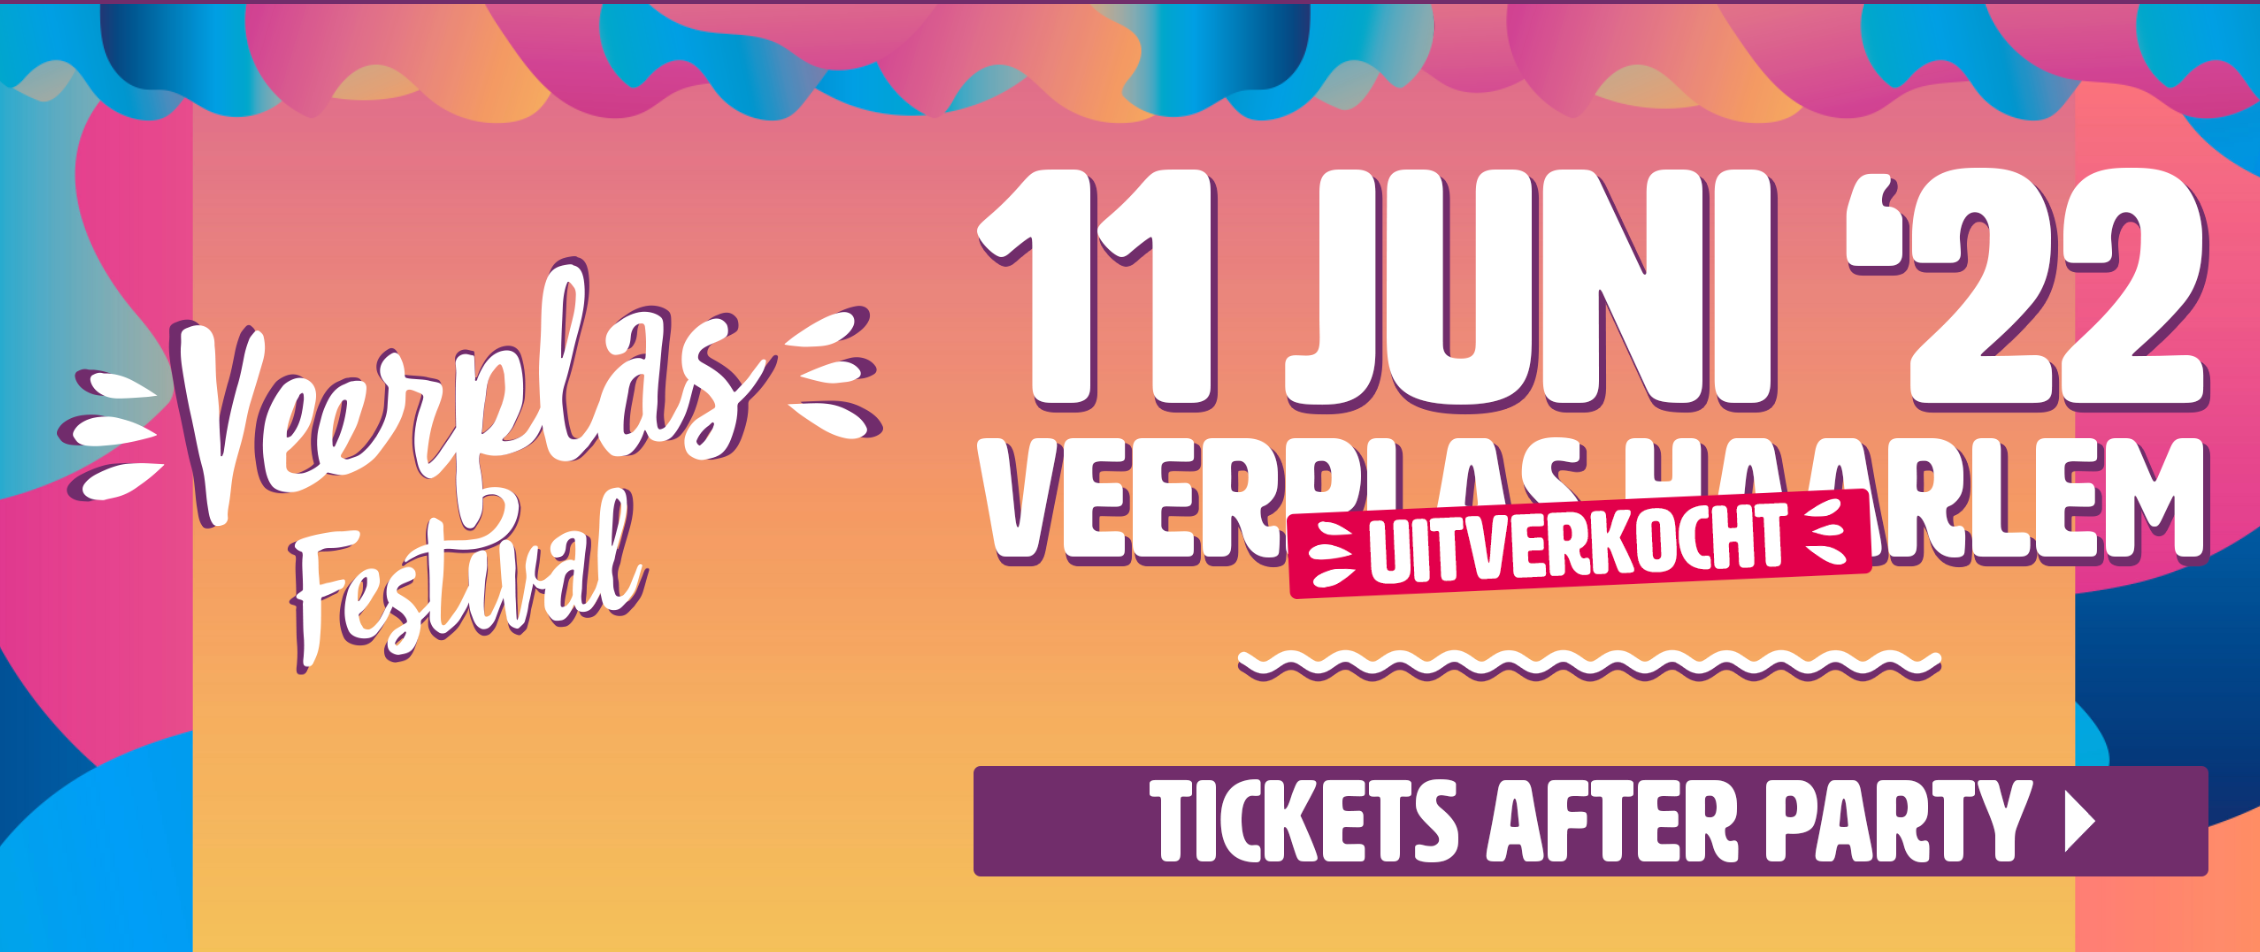 SOLD OUT Veerplas Festival 2022 - フライヤー表